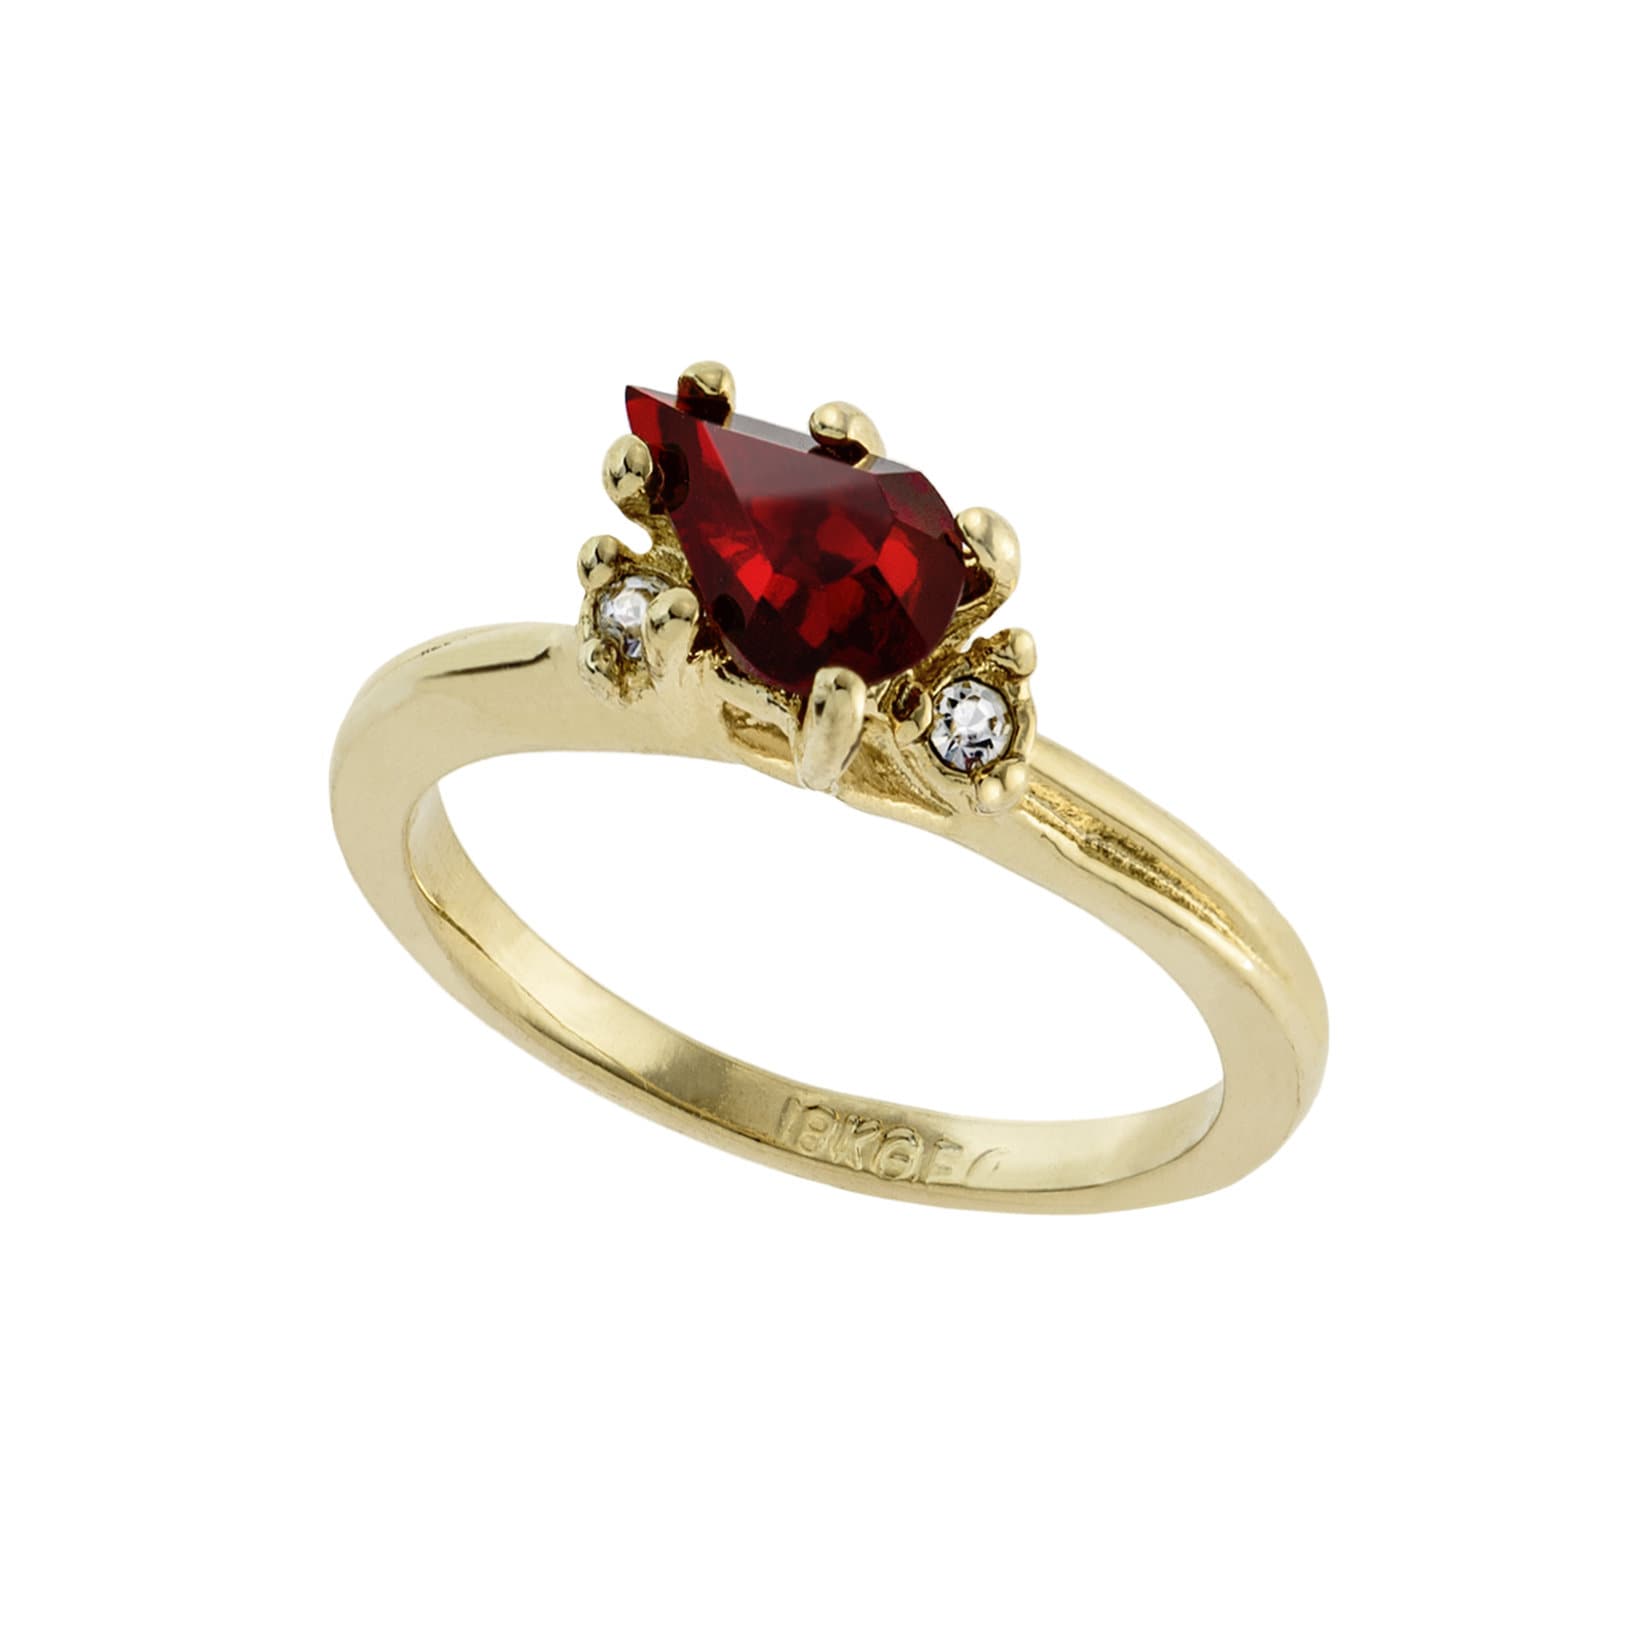 Vintage Ring Ruby and Clear Swarovski Crystals 18k Gold Band February Birthstone #R1453 - Limited Stock - Never Worn